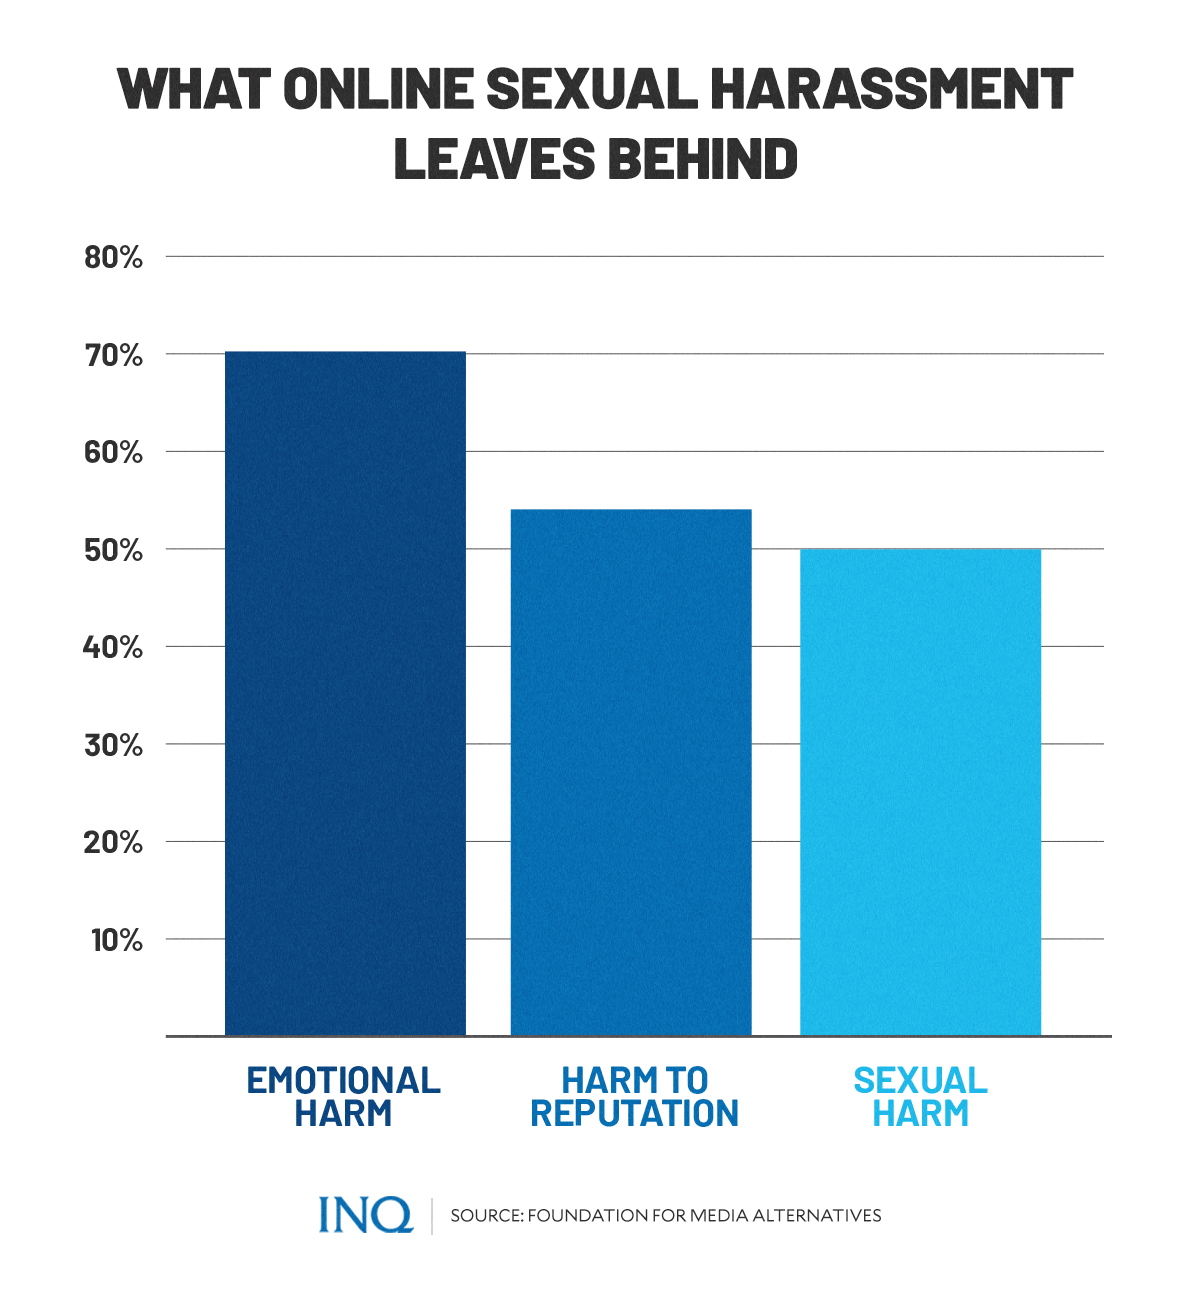 What online sexual harassment leaves behind